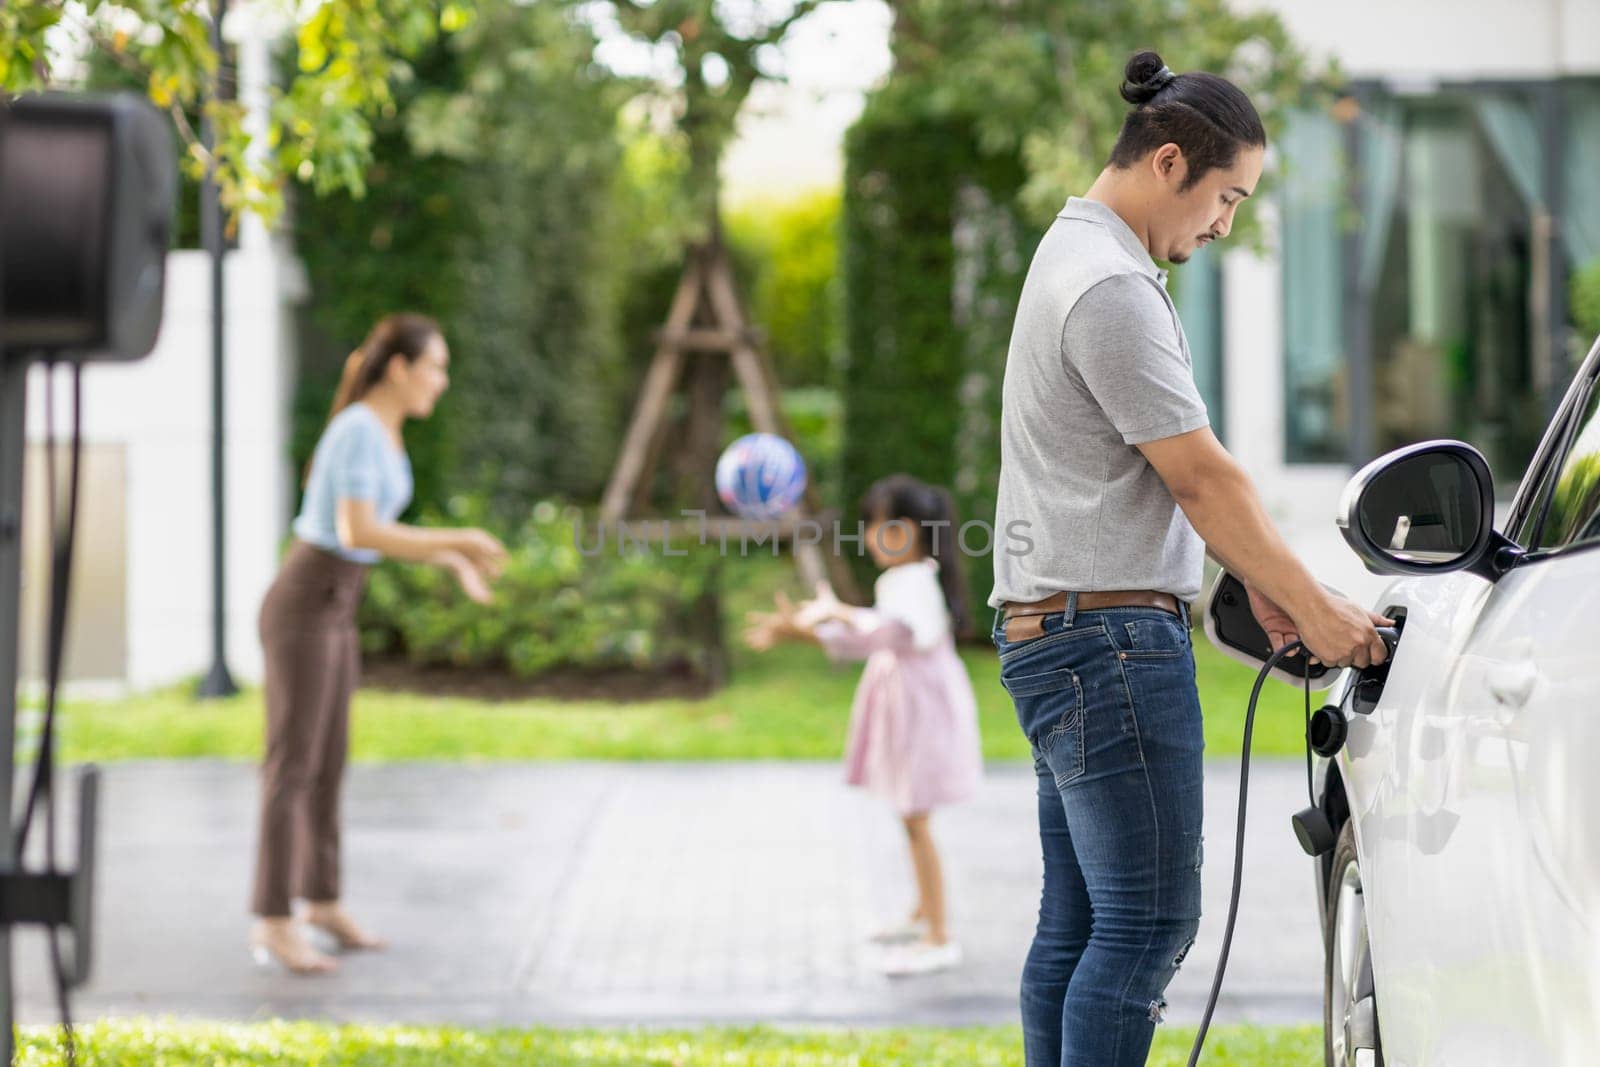 Focus image of progressive man charging electric car from home charging station with blur mother and daughter playing together in the background.